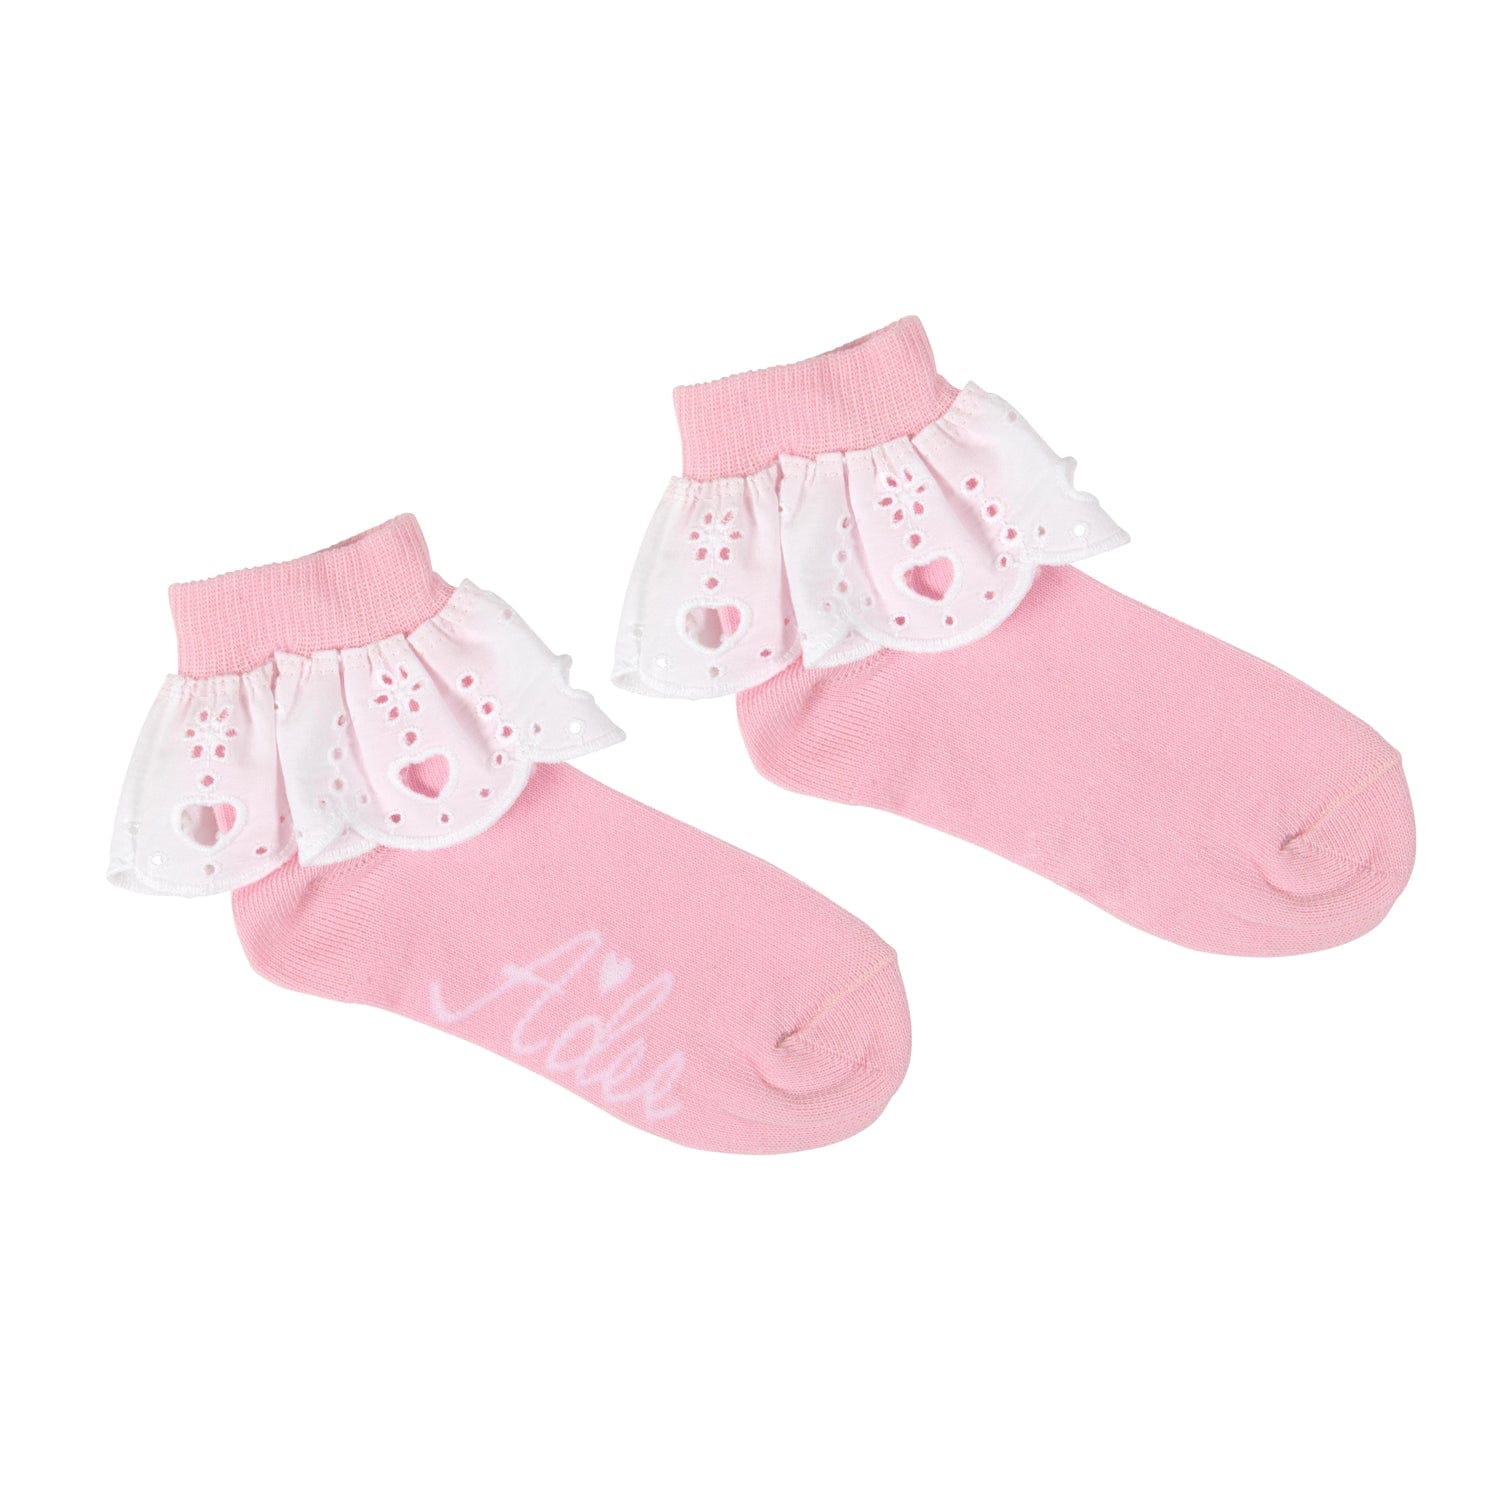 A DEE - Lenni Chic Chevron Broderie Anglaise Ankle Socks  - Pink